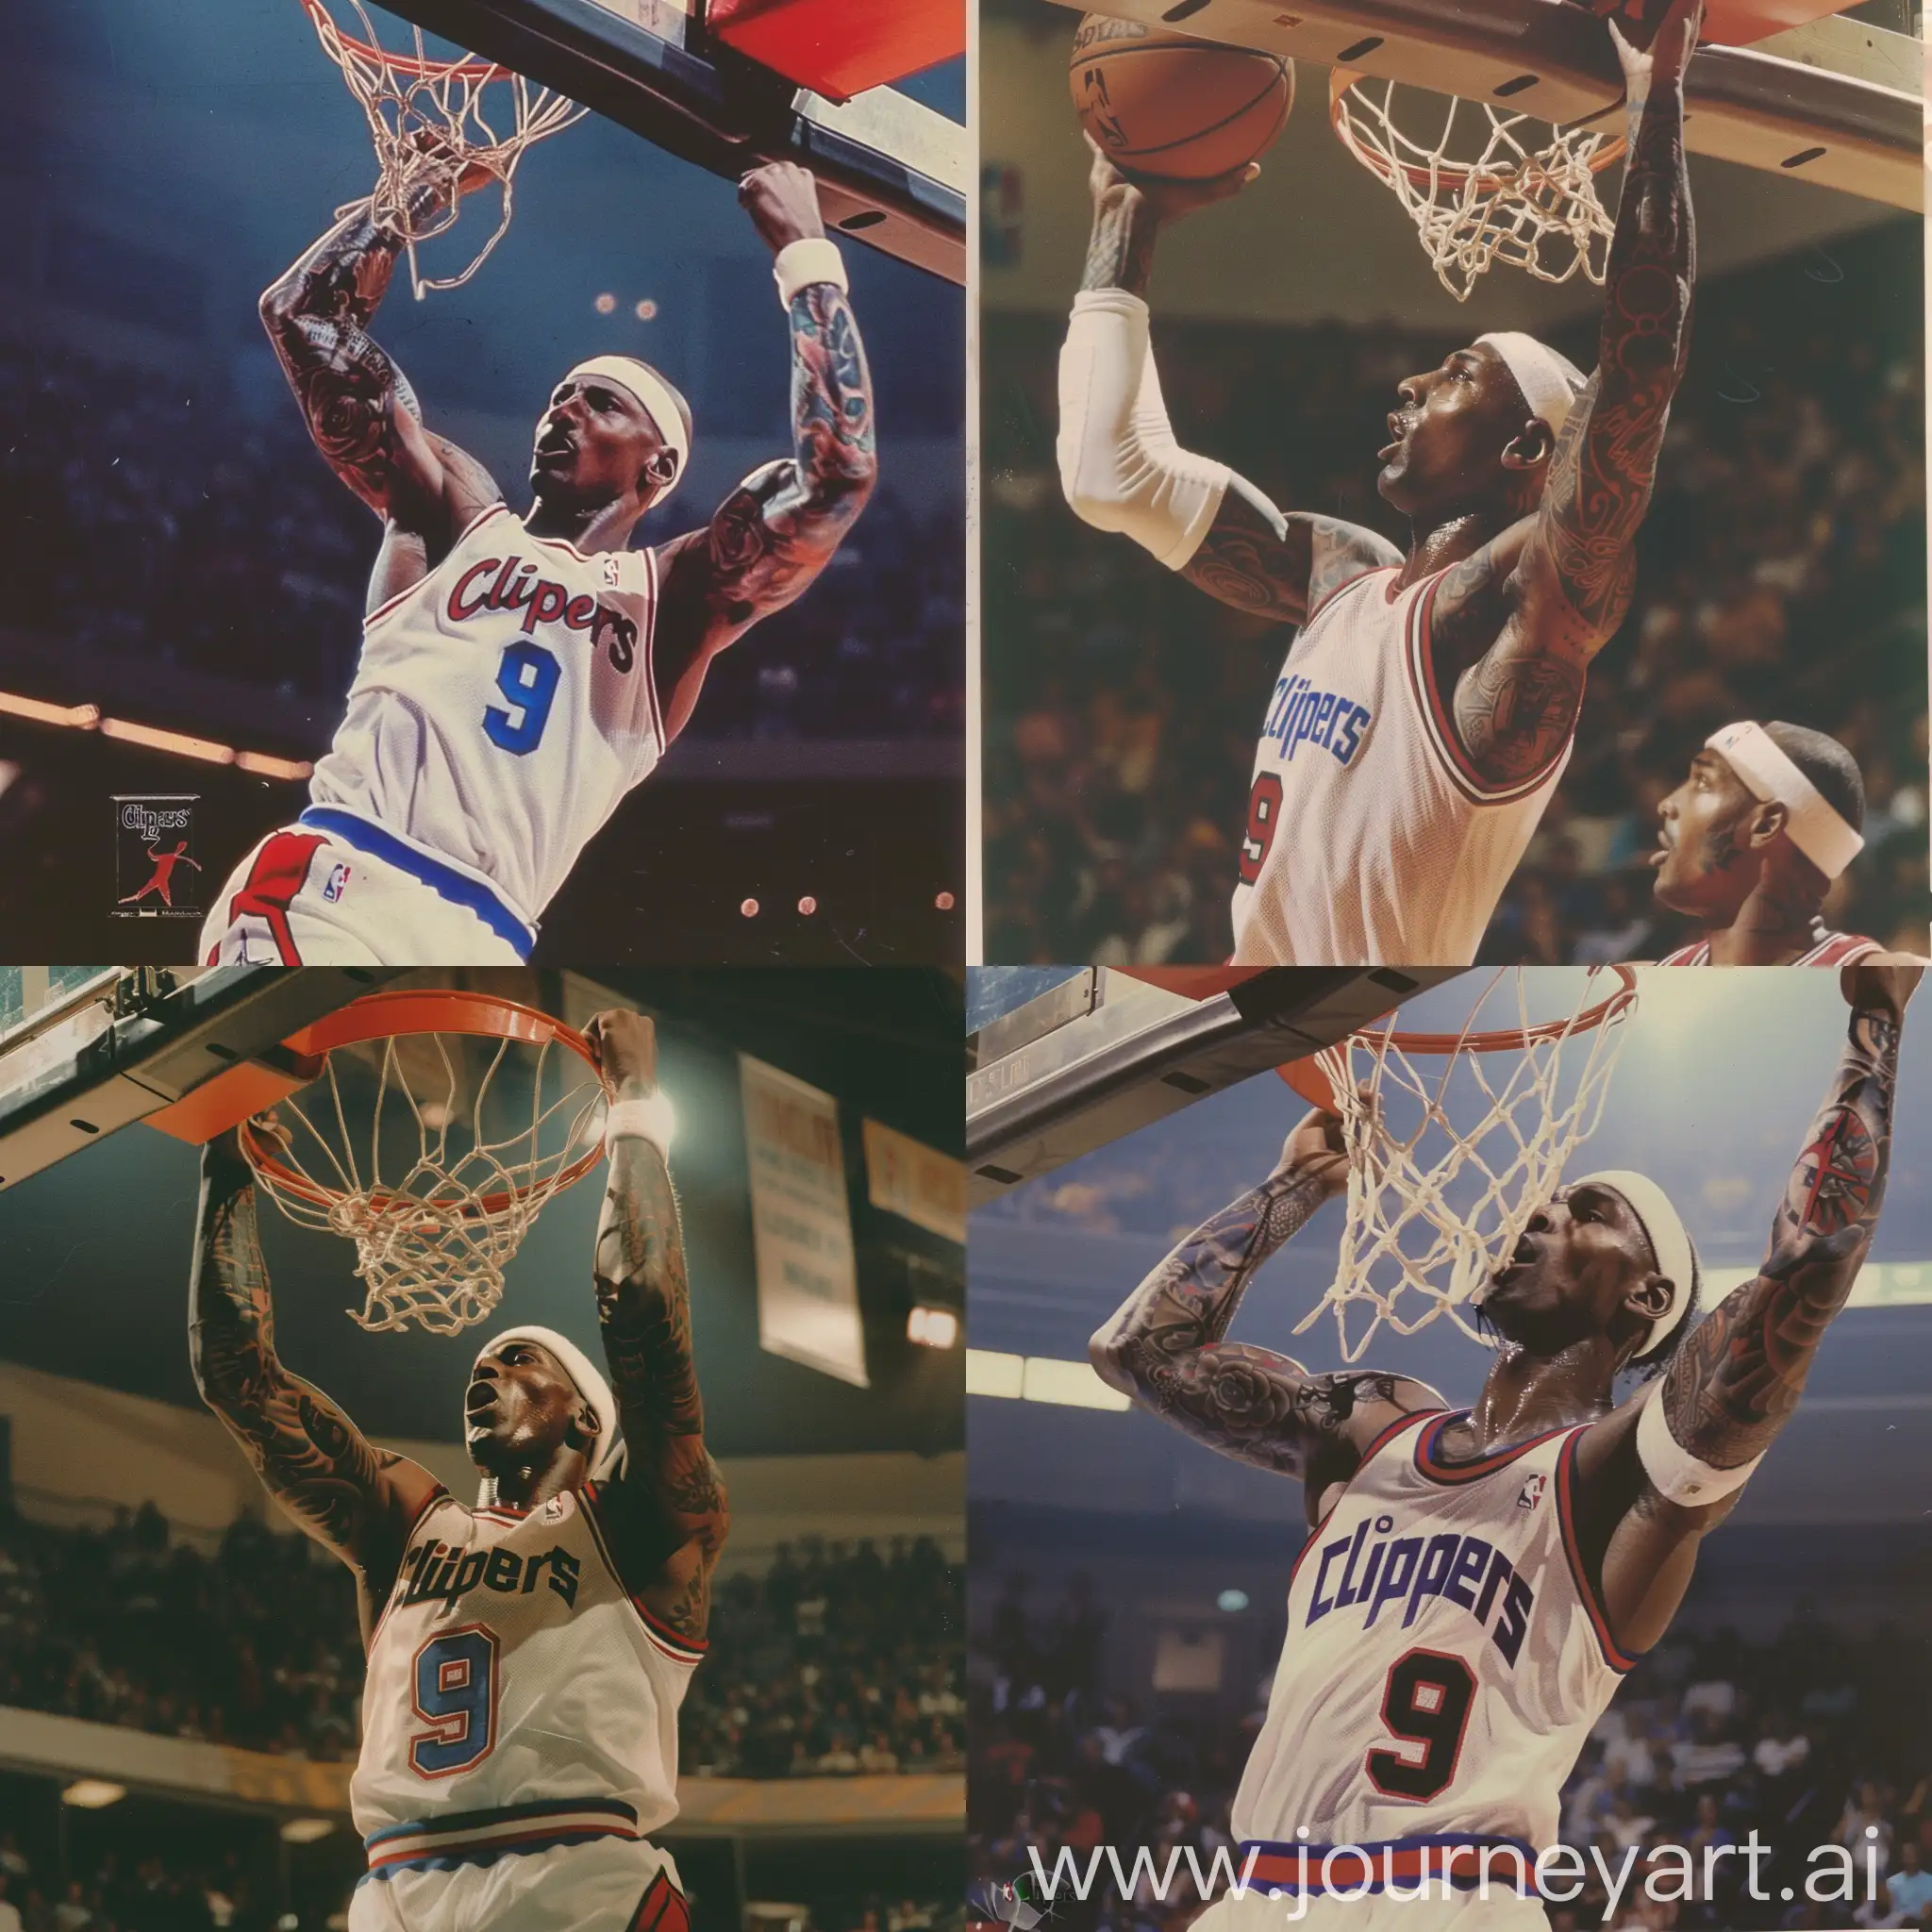 1980s-Style-Michael-Jordan-Dunking-in-Clippers-Jersey-with-Tattoos-and-Headband